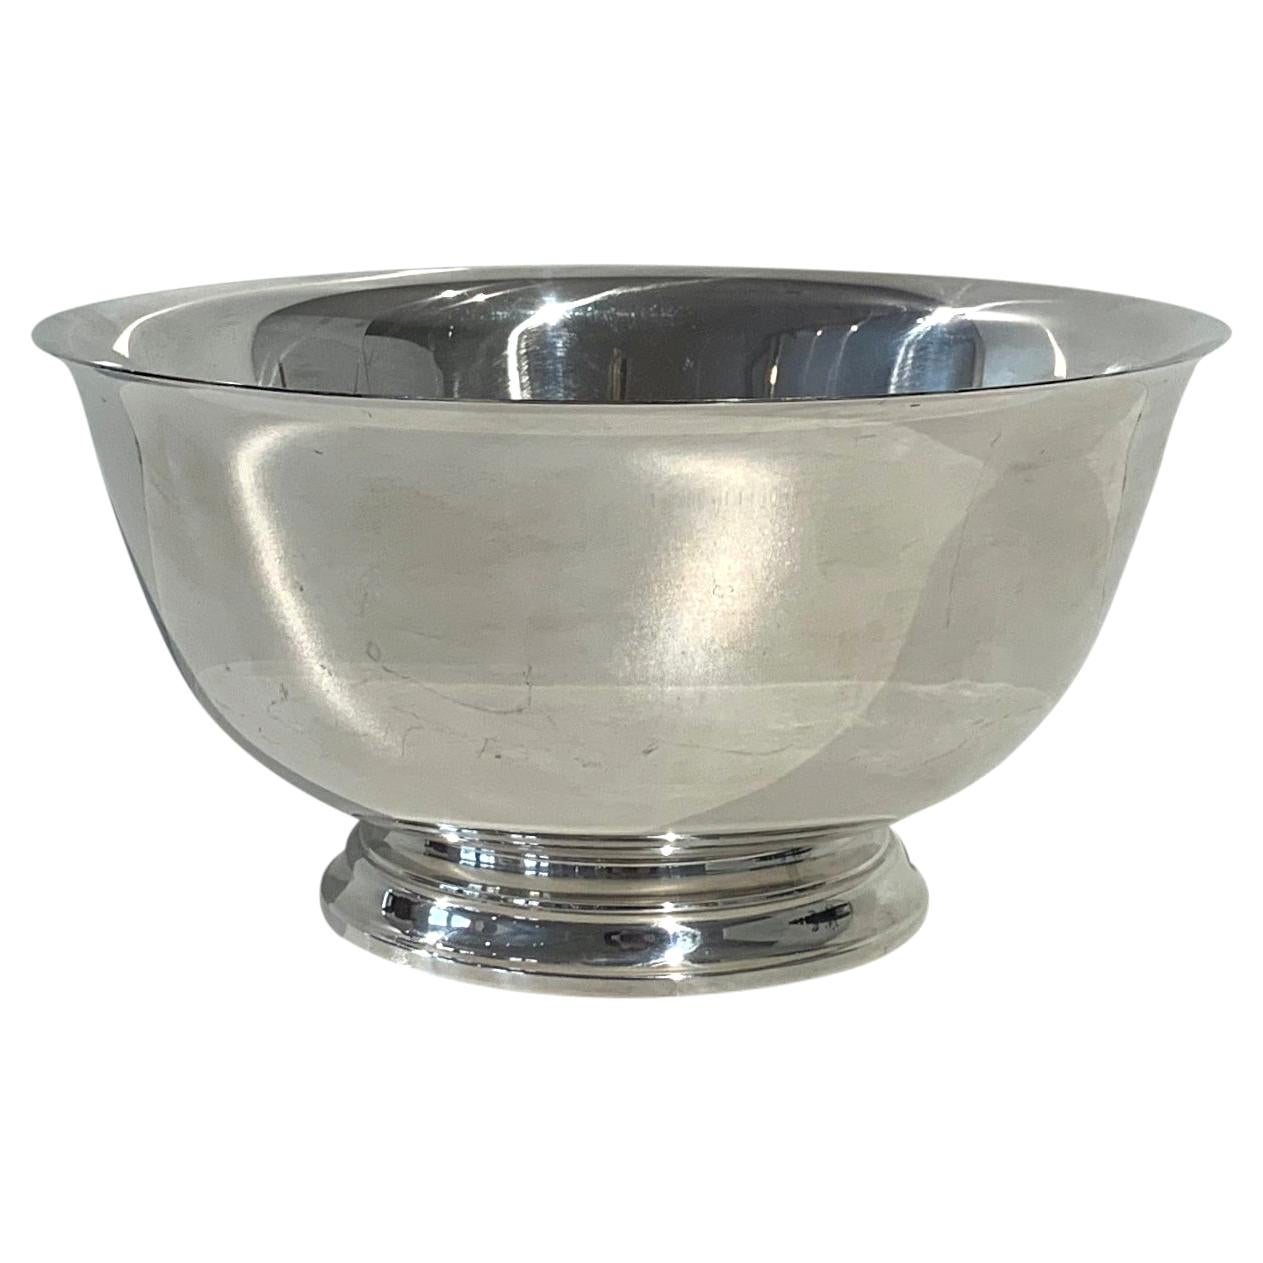 Large Tiffany & Co. Bowl, Sterling Silver, New York, 1930-1950s